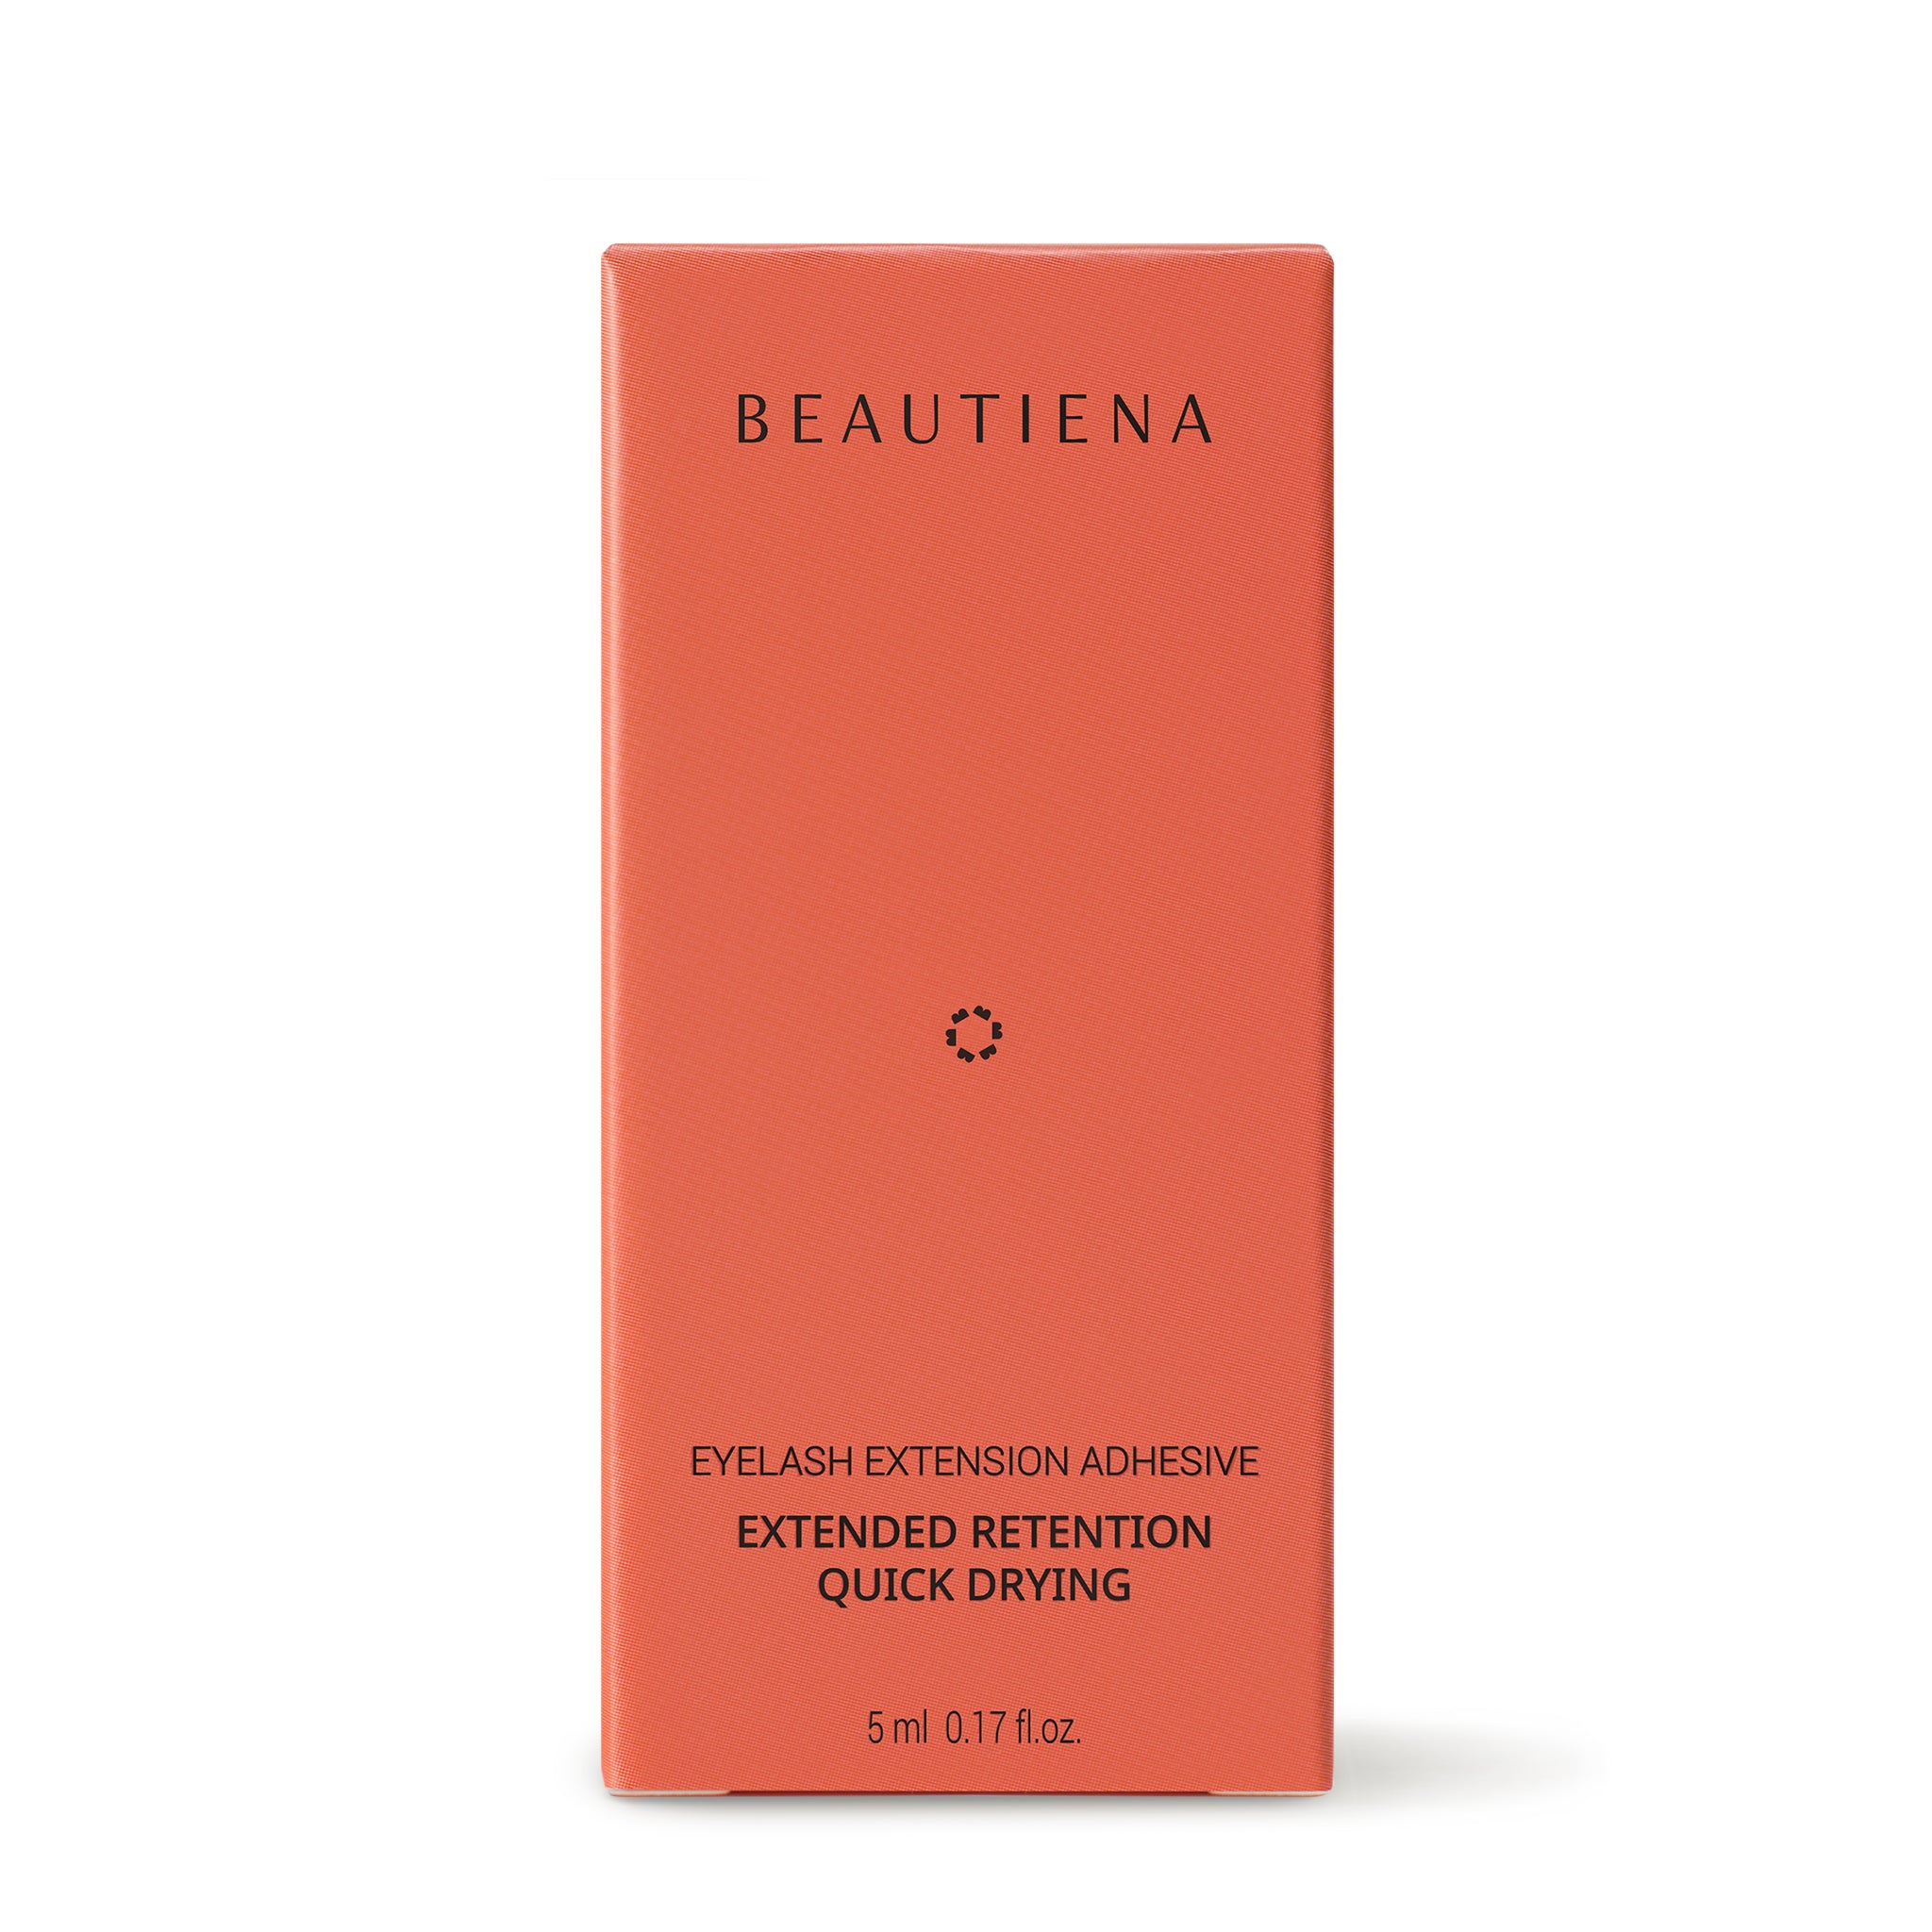 BEAUTÉ Essential Glue offers remarkable retention up to 7 weeks with a water-resistant feature and a quick drying time of 1.0 - 2.0 seconds. Not only harmful materials such as latex and formaldehyde are used but no animal test is done as well. The glue provides lower fume which helps customers a better experience.